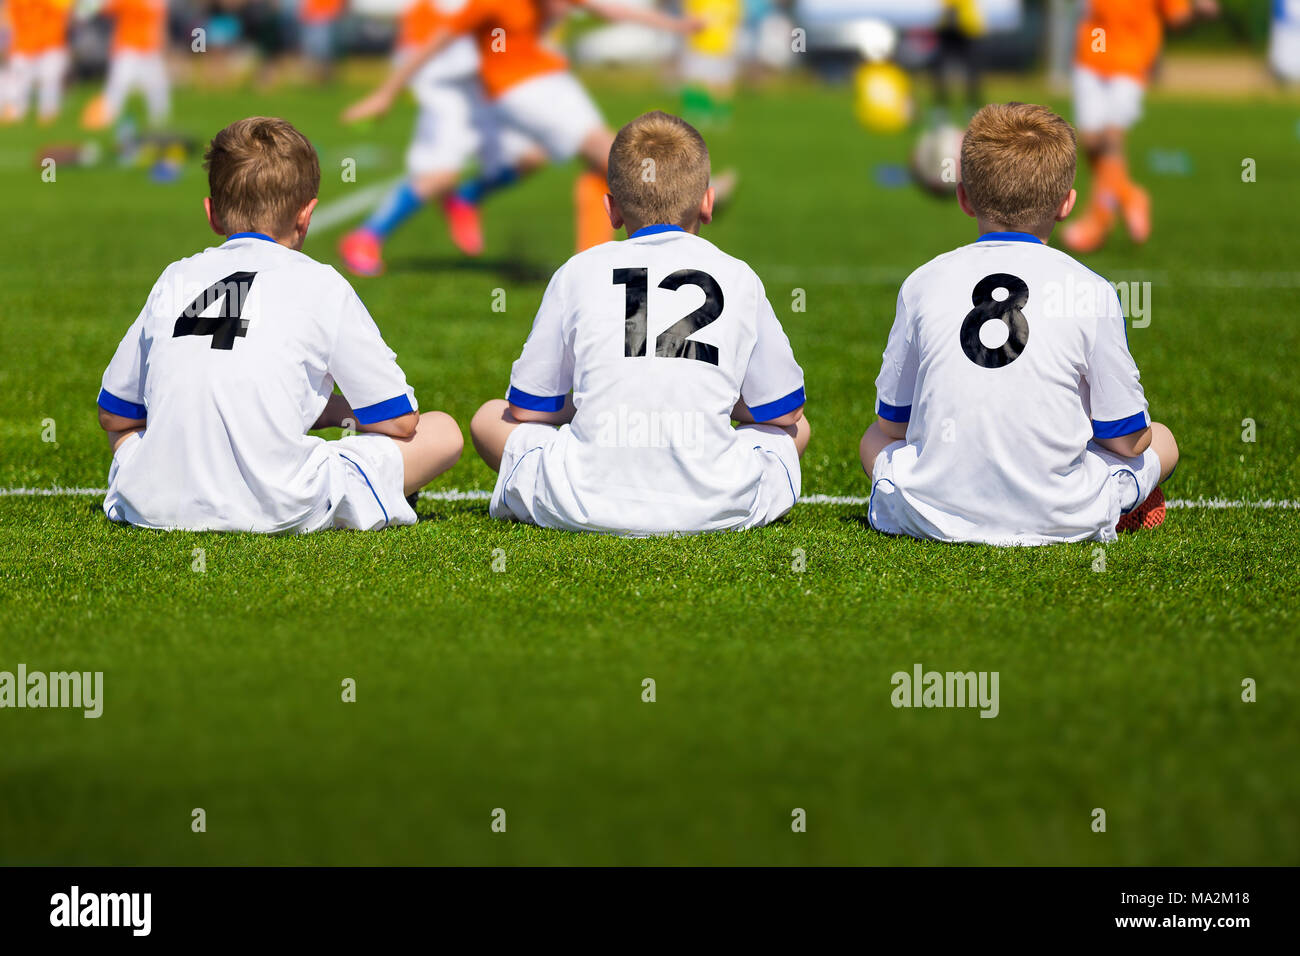 Coaching Youth Soccer. Young Boys Sitting on Football Field and Watching Tournament Game. Football Match for Kids Stock Photo